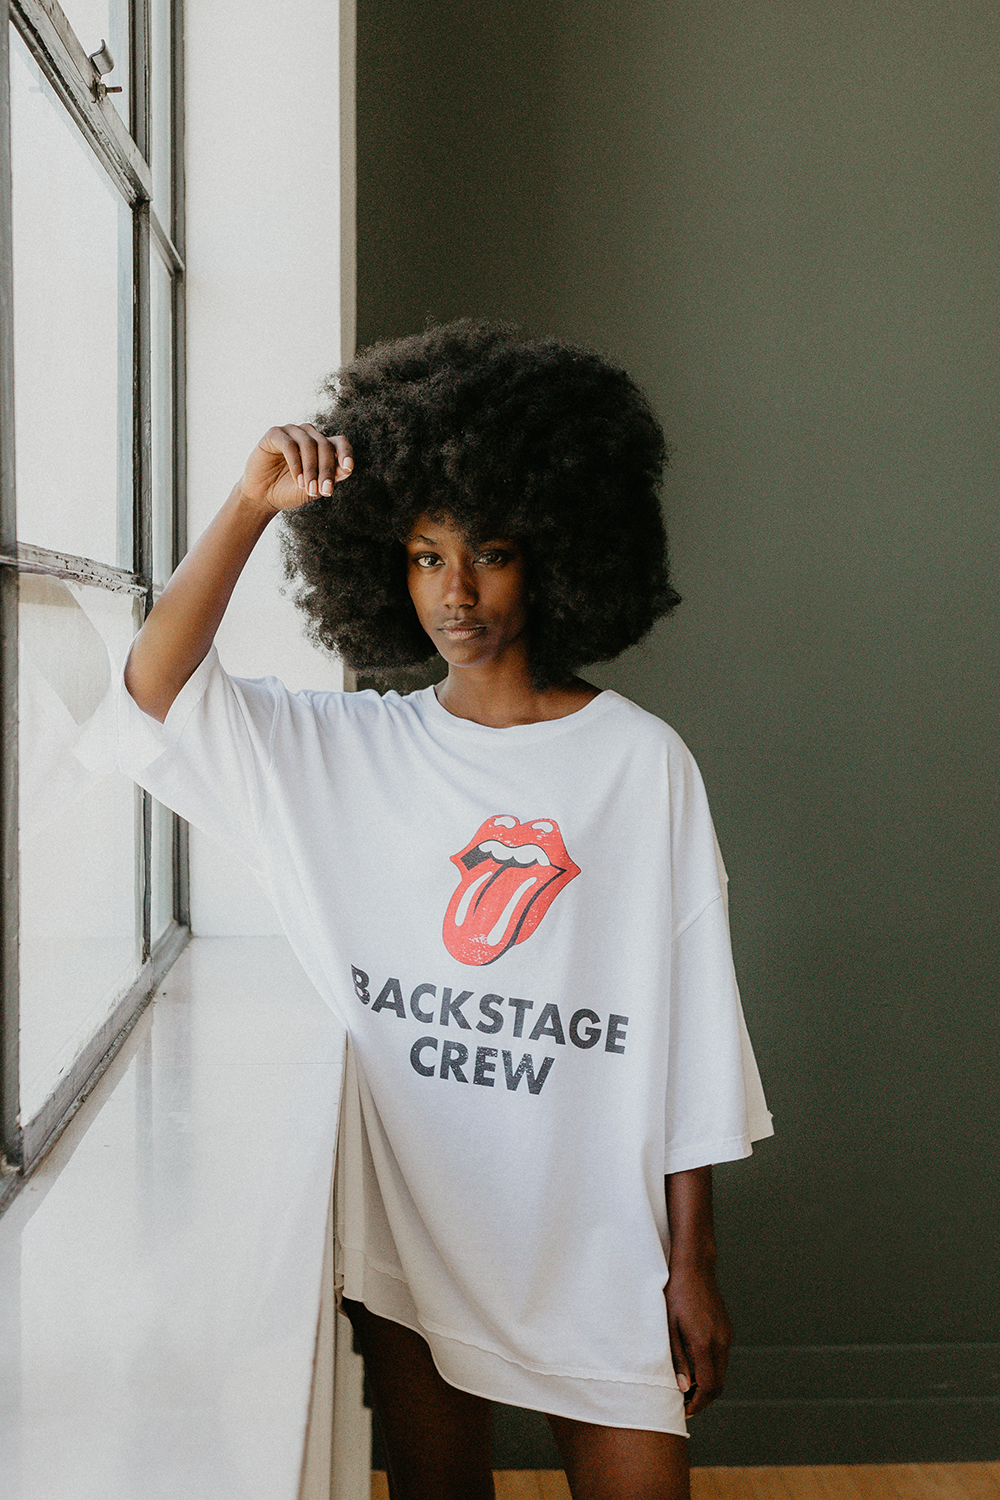 rolling stones backstage crew oversized tee by people of leisure